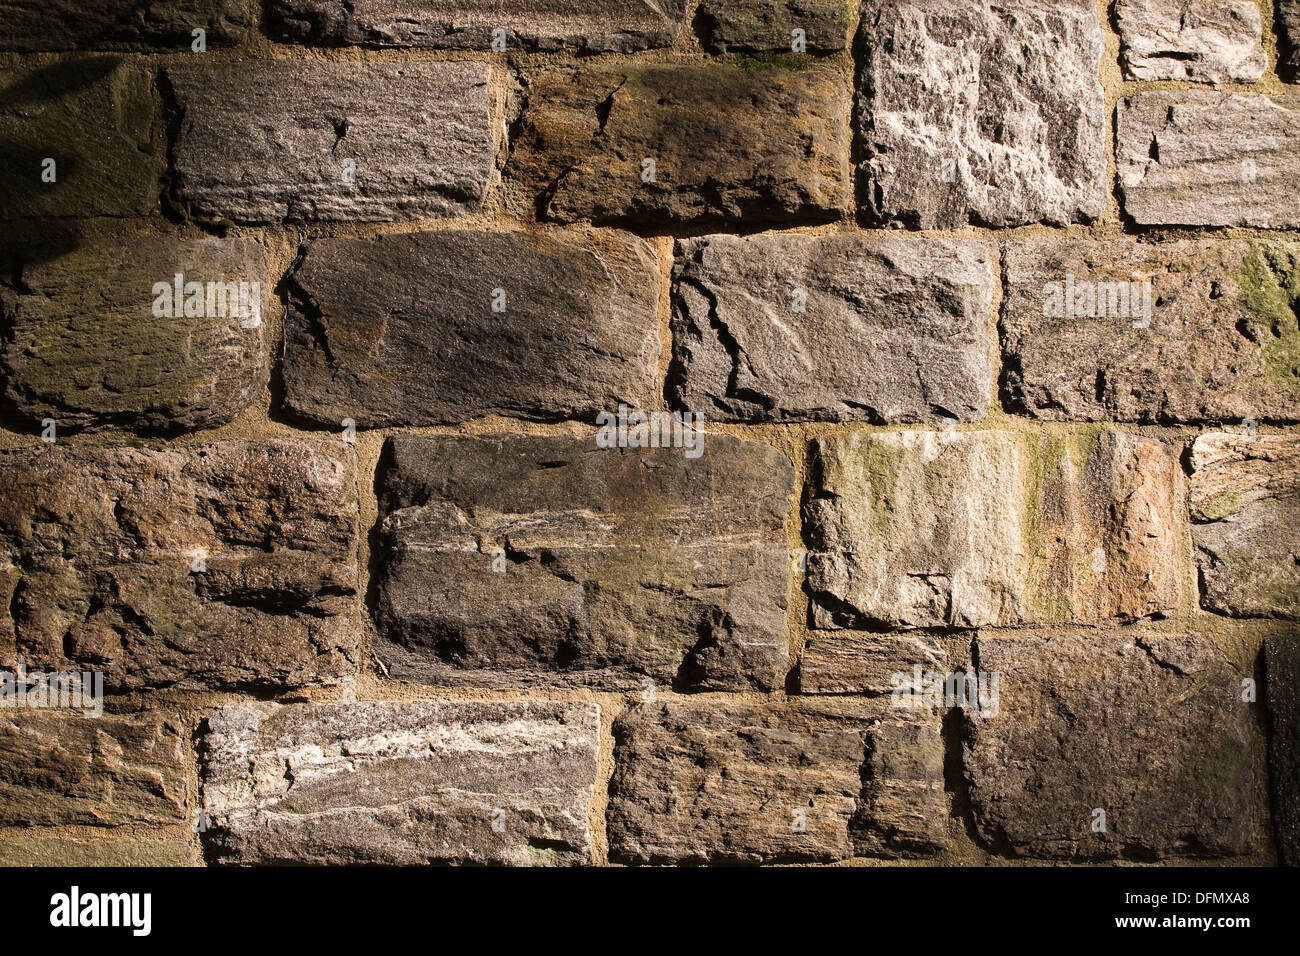 Masonry wall constructed of large blocks of naturally occurring New York Schist stone of various sizes Stock Photo